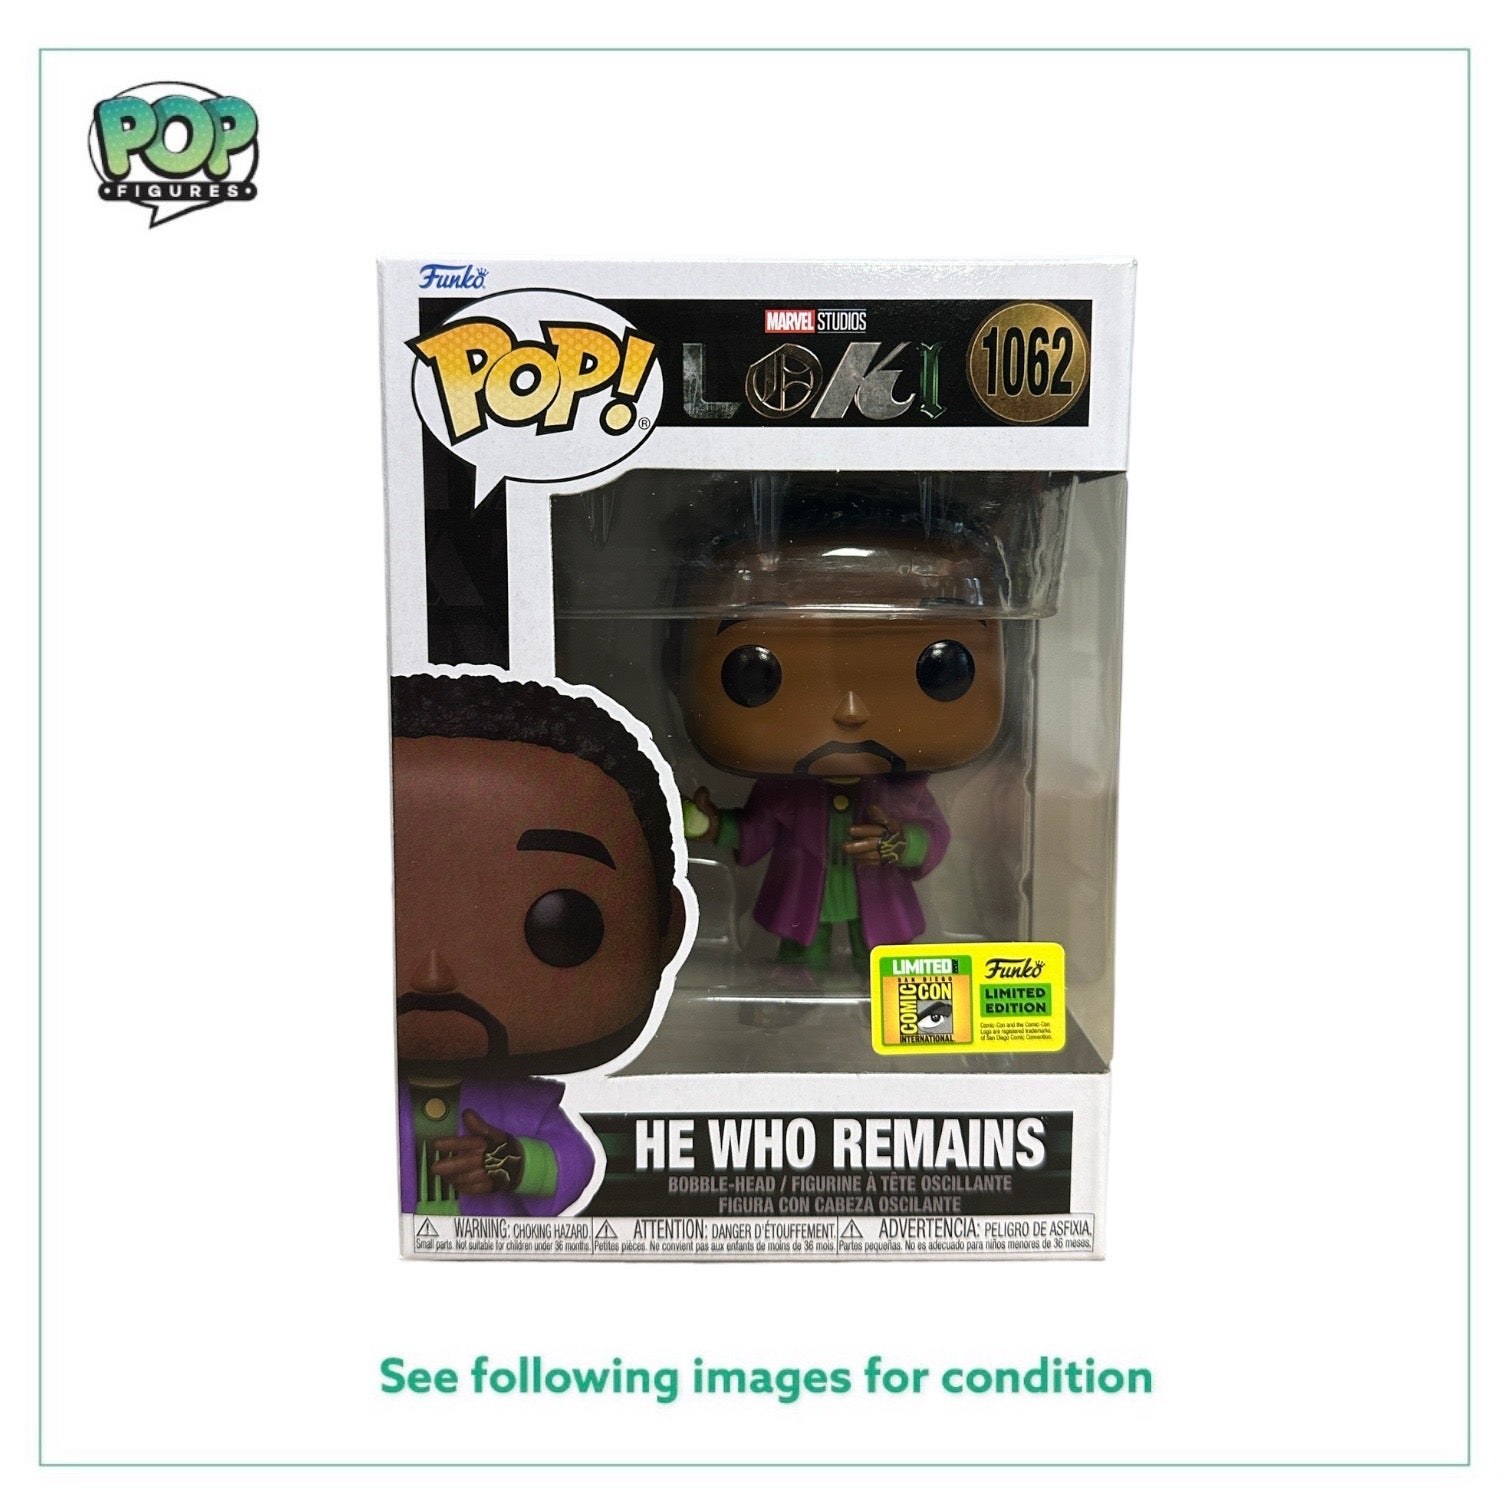 He Who Remains #1062 Funko Pop! - Loki - SDCC 2022 Official Convention Exclusive - Condition 9/10